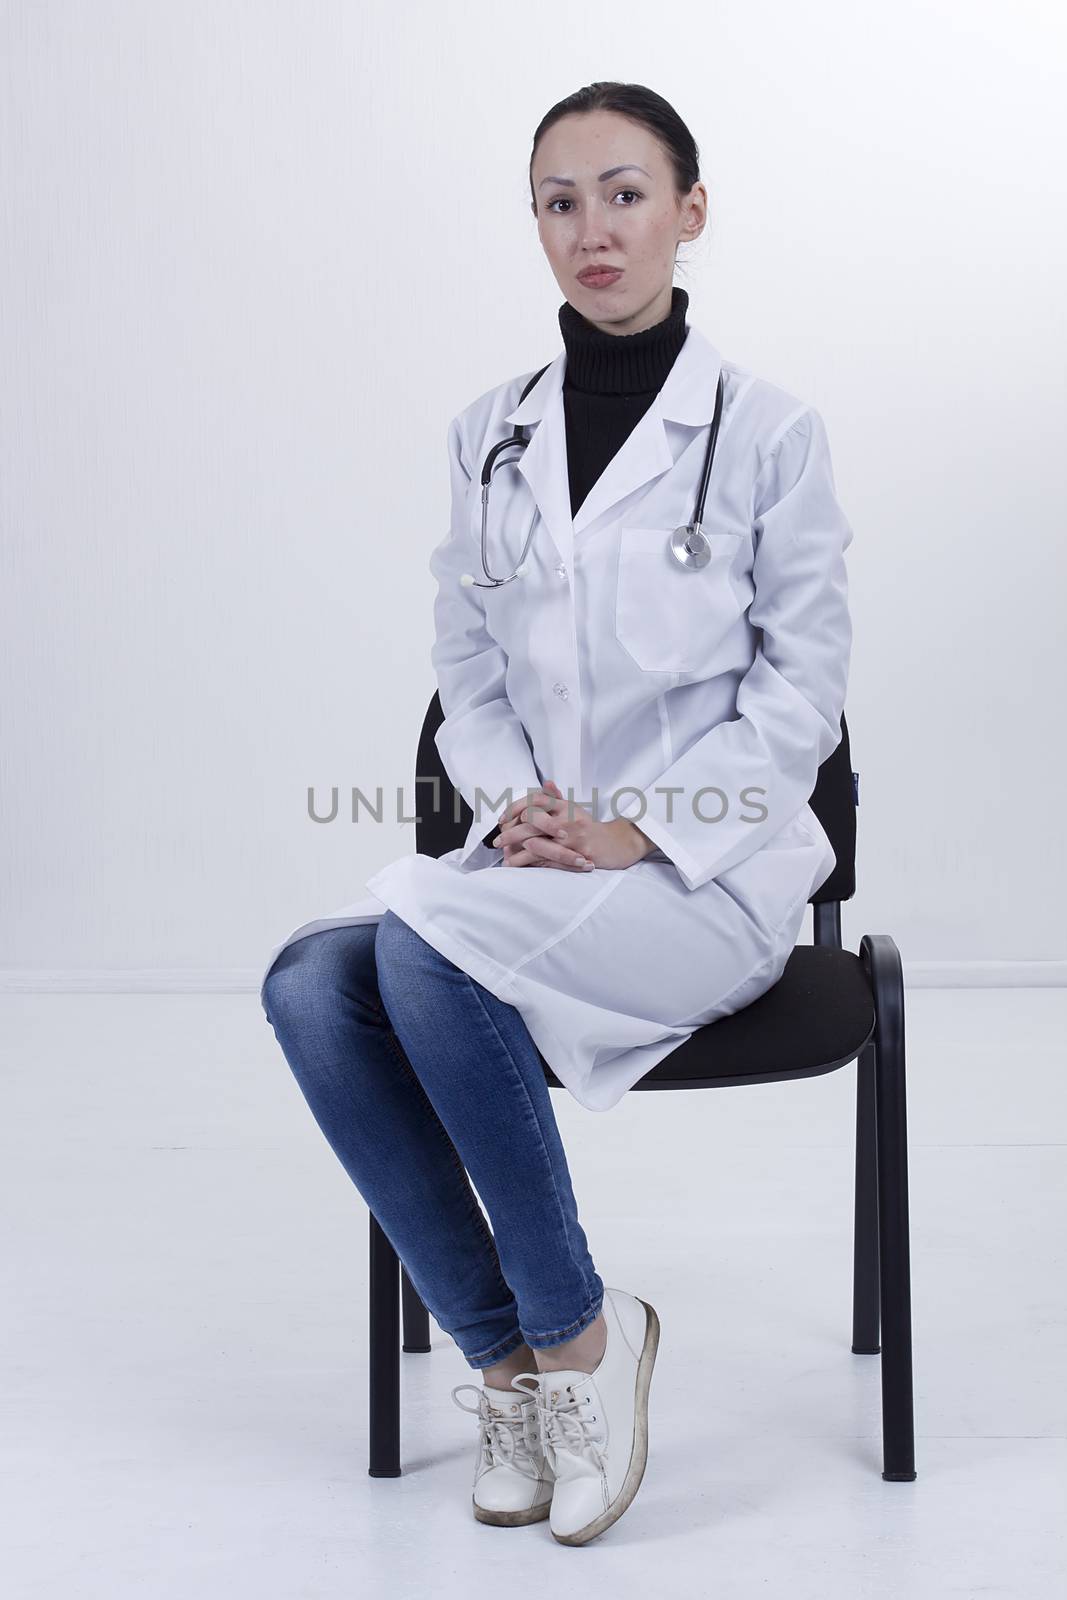 Serious female medical student sitting on chair